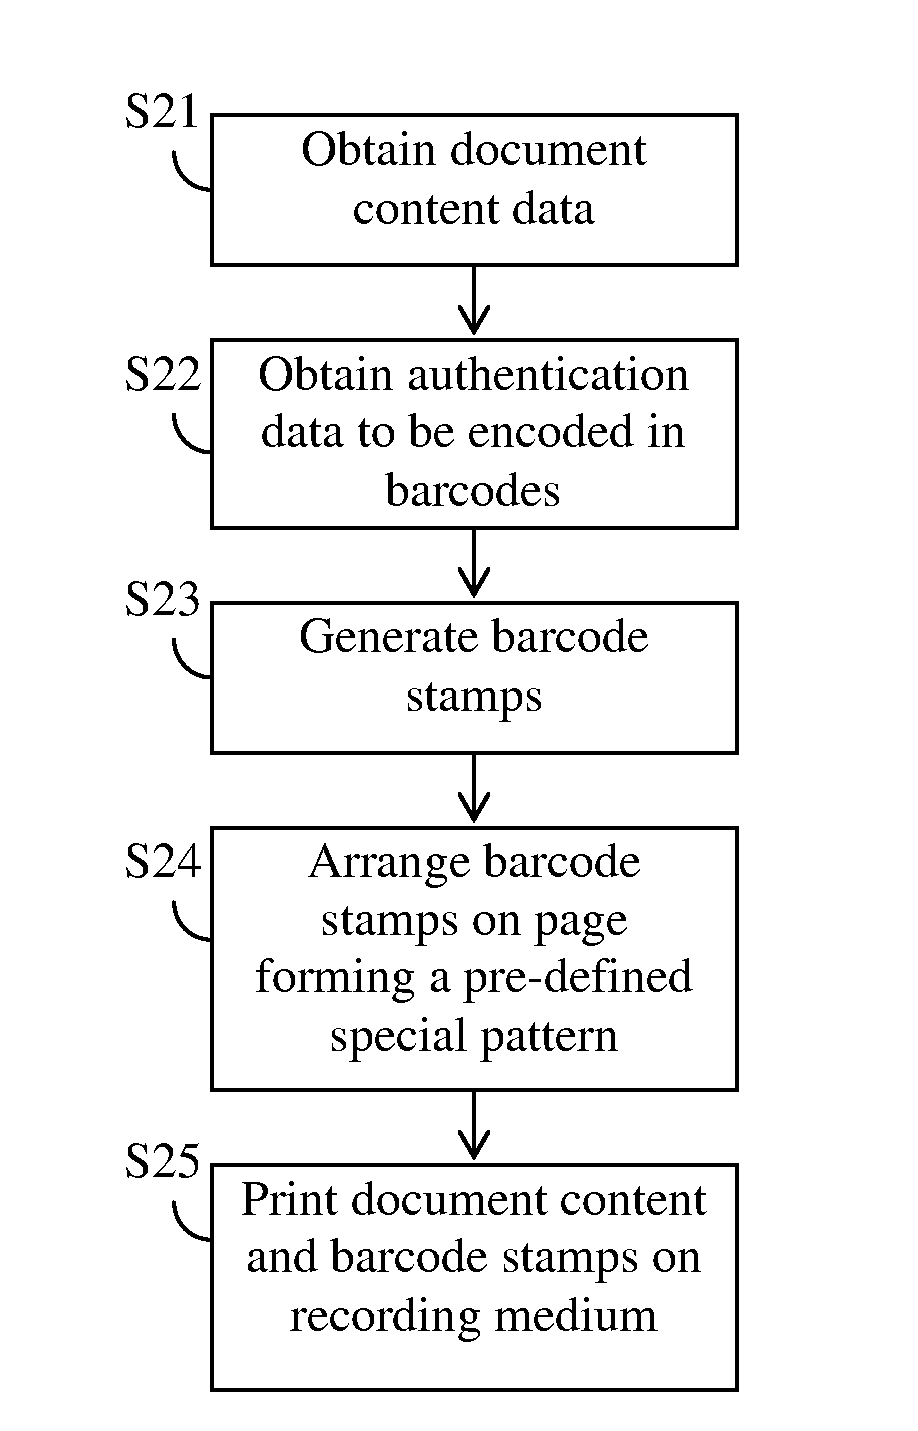 Creation and placement of two-dimensional barcode stamps on printed documents for storing authentication information